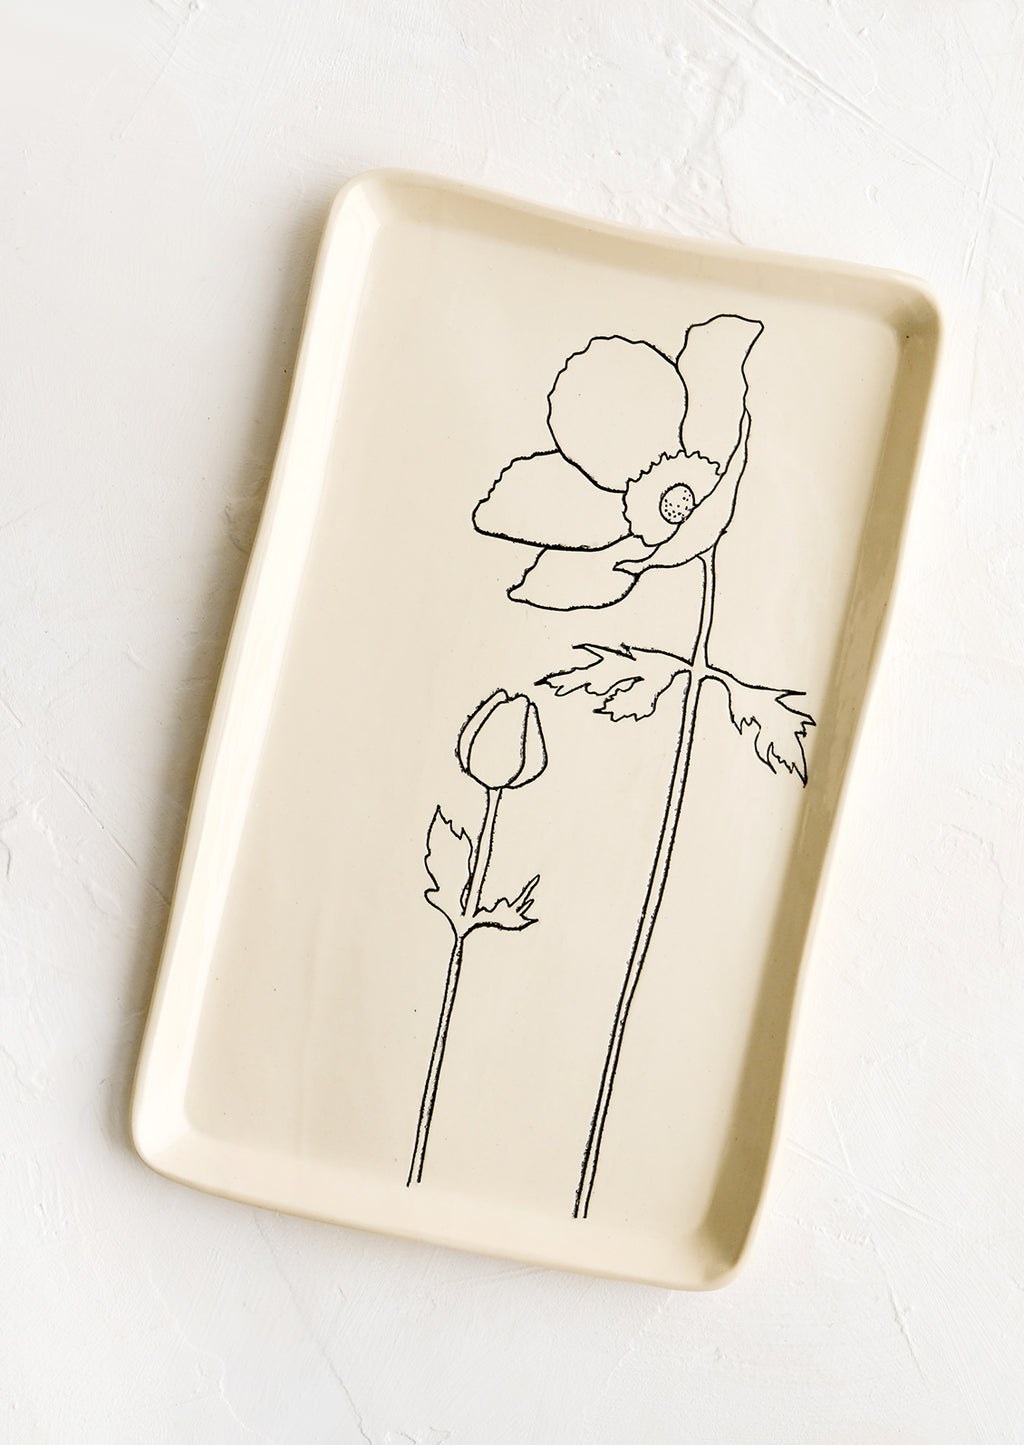 Anemone: A rectangular ceramic tray in natural bisque color with an etched black drawing of anemone flower.